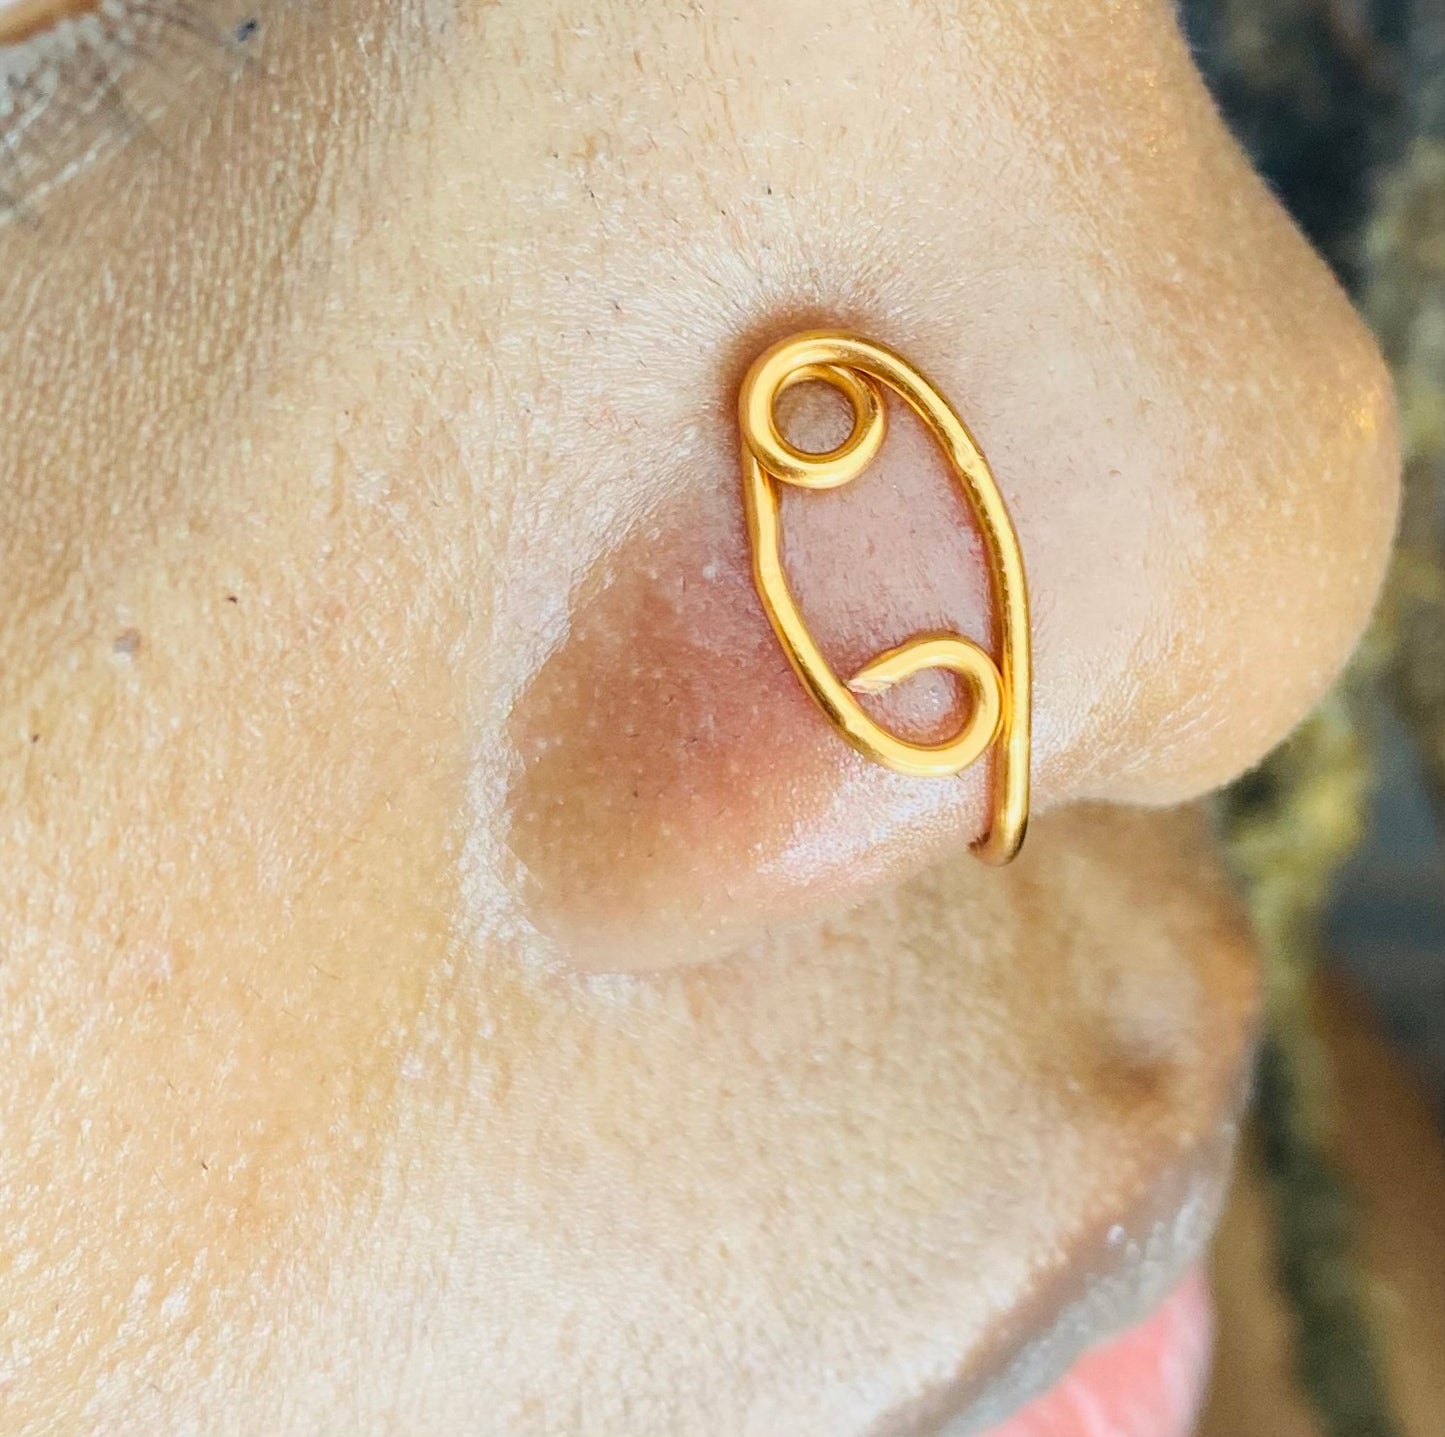 Cancer Nose Lace